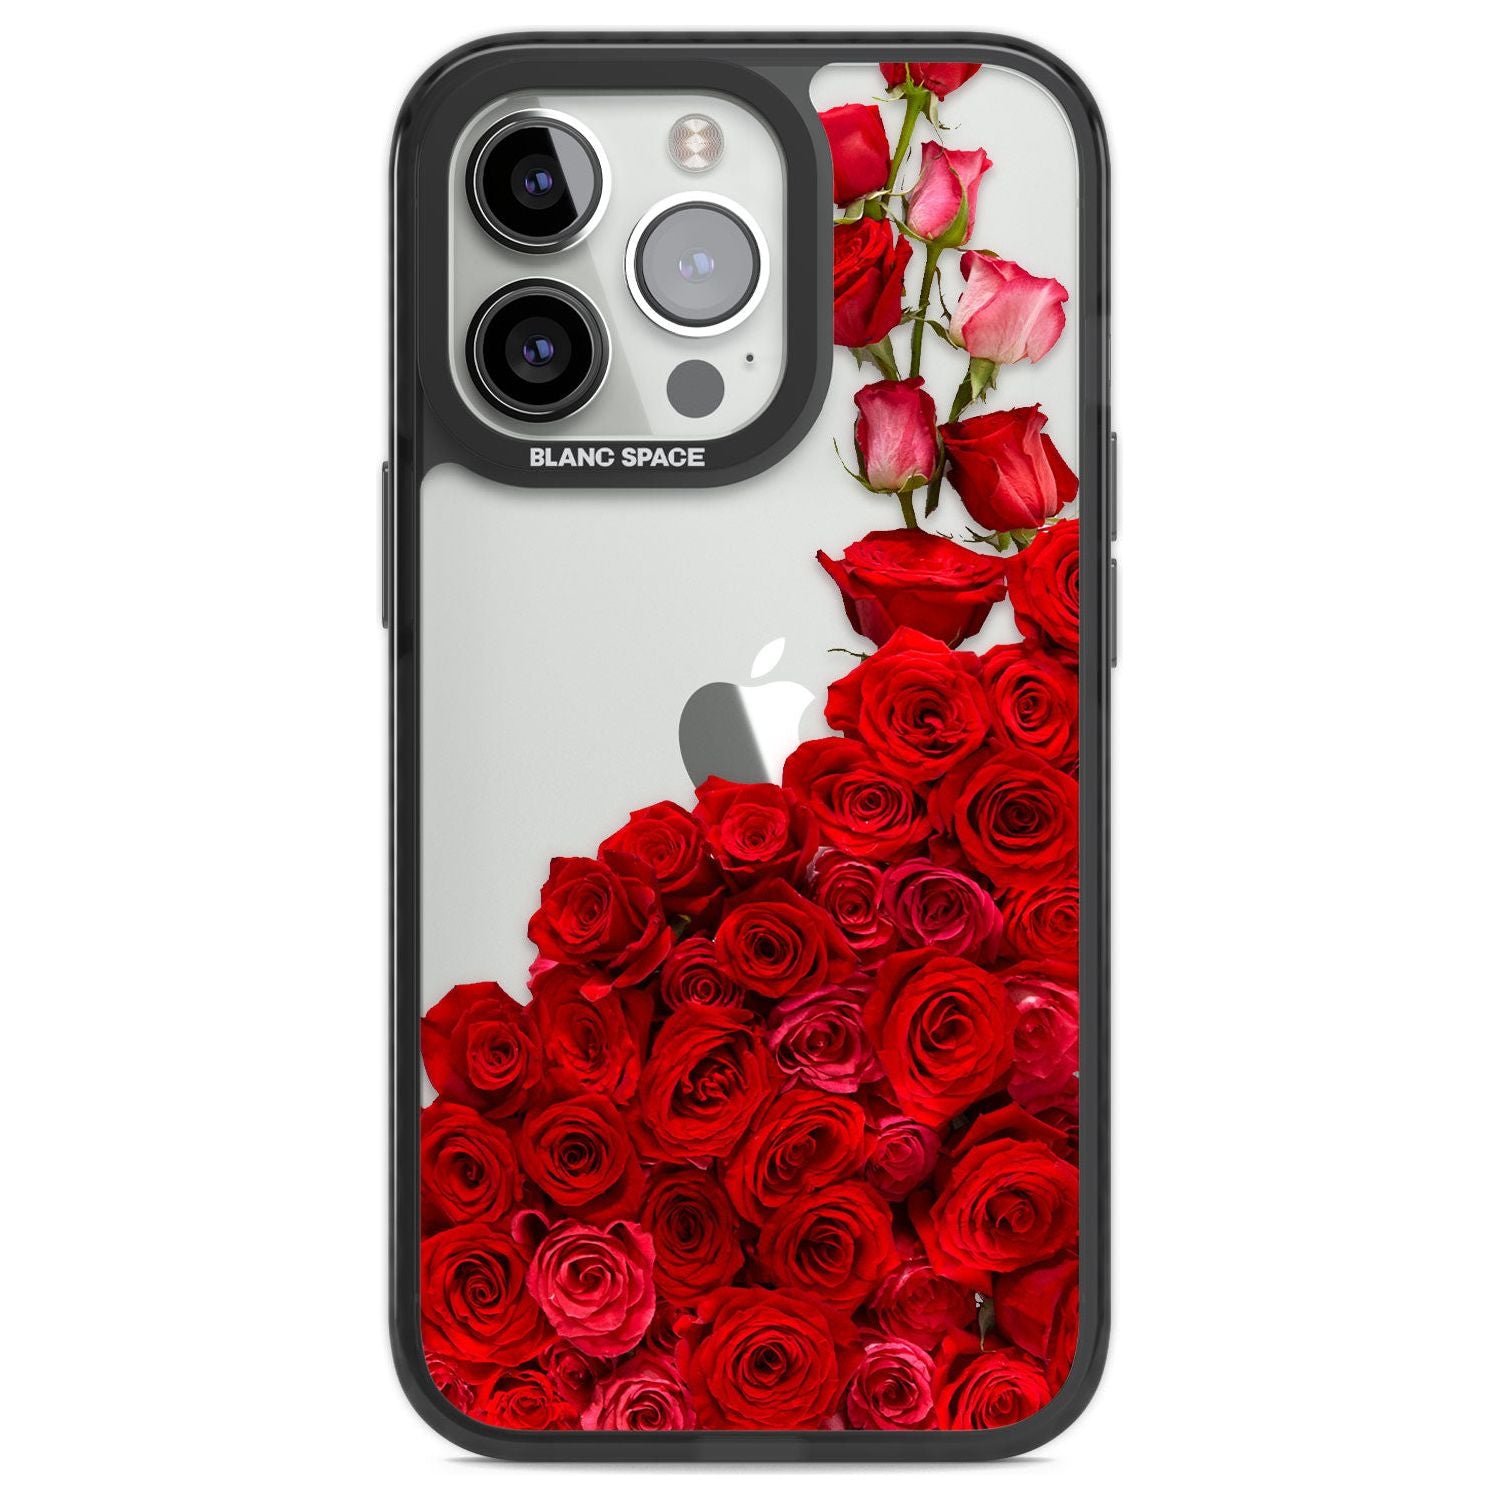 Floral Roses Phone Case iPhone 13 Pro / Black Impact Case,iPhone 14 Pro / Black Impact Case,iPhone 15 Pro / Black Impact Case,iPhone 15 Pro Max / Black Impact Case Blanc Space